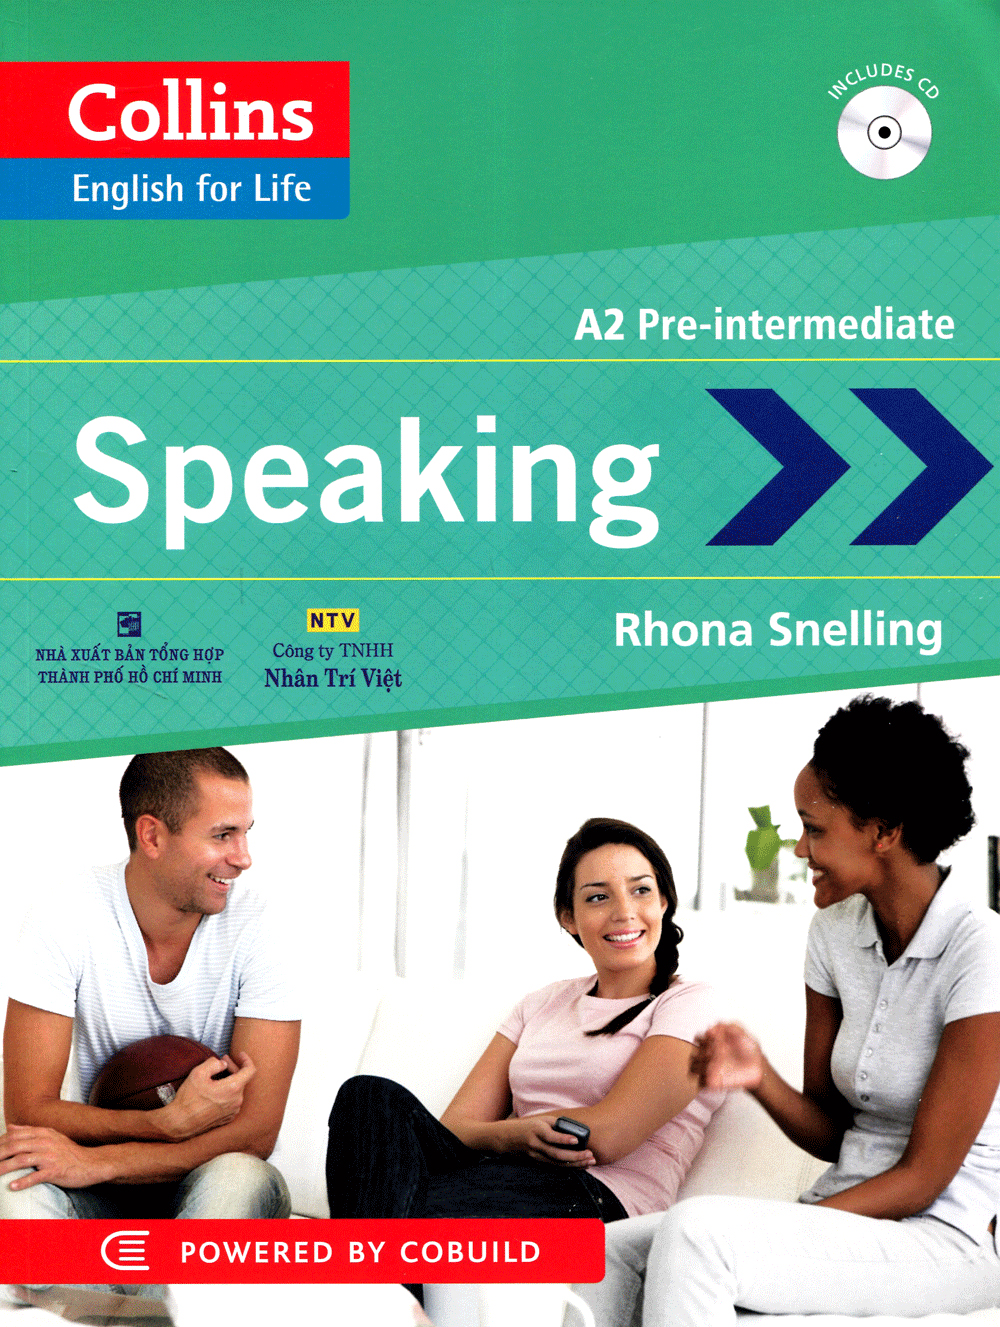 Collins English For Life - Speaking - A2 Pre-Intermediate Cd PDF